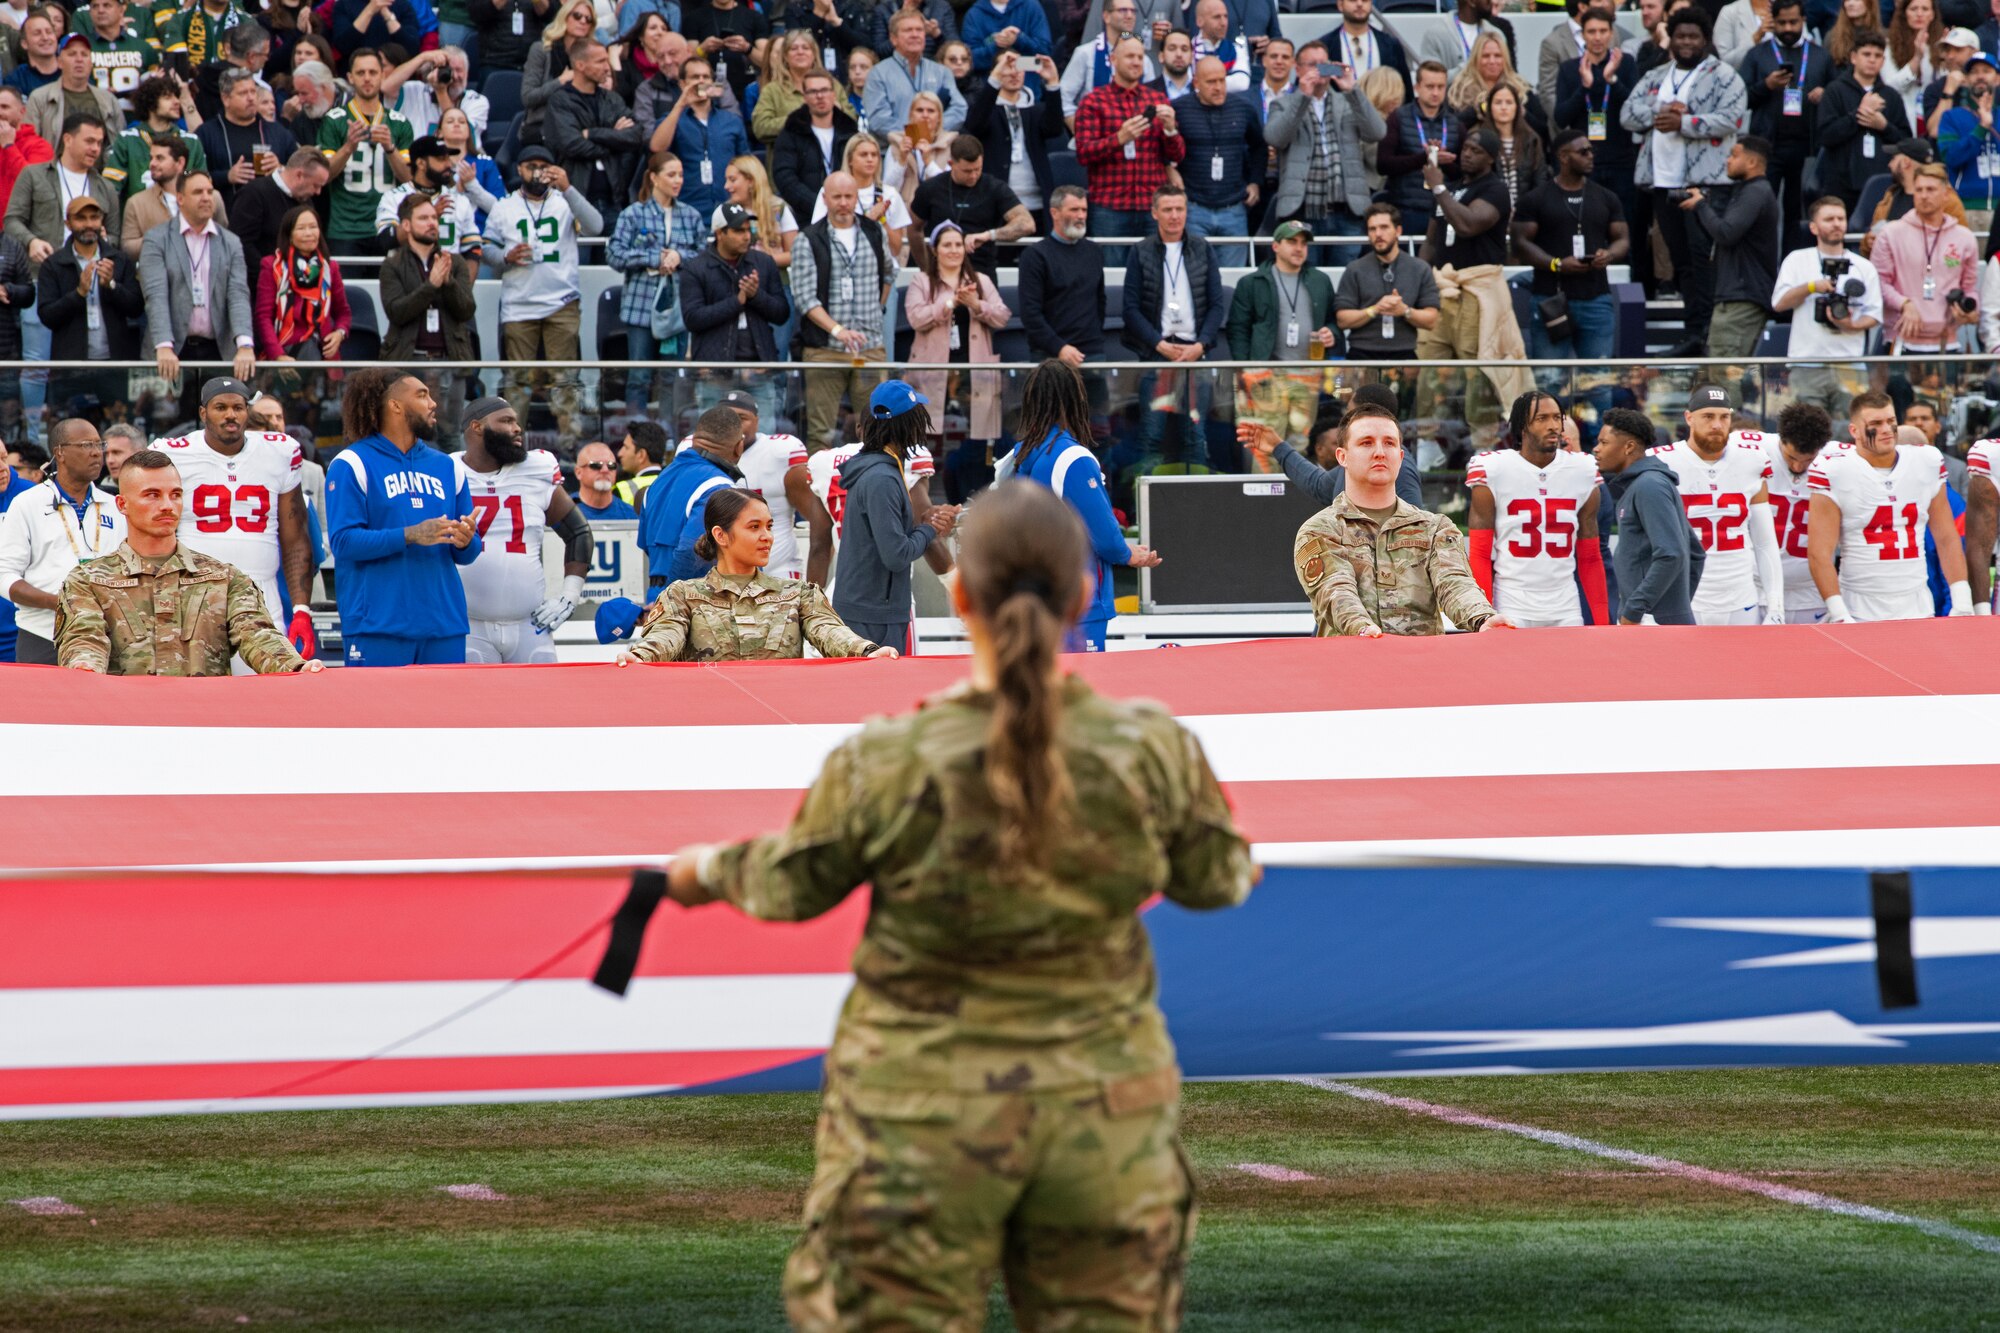 U.S. Airmen assigned to Royal Air Force Mildenhall and RAF Lakenheath hold an unfurled U.S. Flag during the pre-game ceremony of the National Football League’s New York Giants vs. Green Bay Packers game at Tottenham Hotspur Stadium, in London, England, Oct. 9, 2022. The pre-game ceremony featured more than 50 Airmen unfurling the flag along with an honor guard team and vocalist to sing the U.S. National Anthem. (U.S. Air Force photo by Tech. Sgt. Anthony Hetlage)